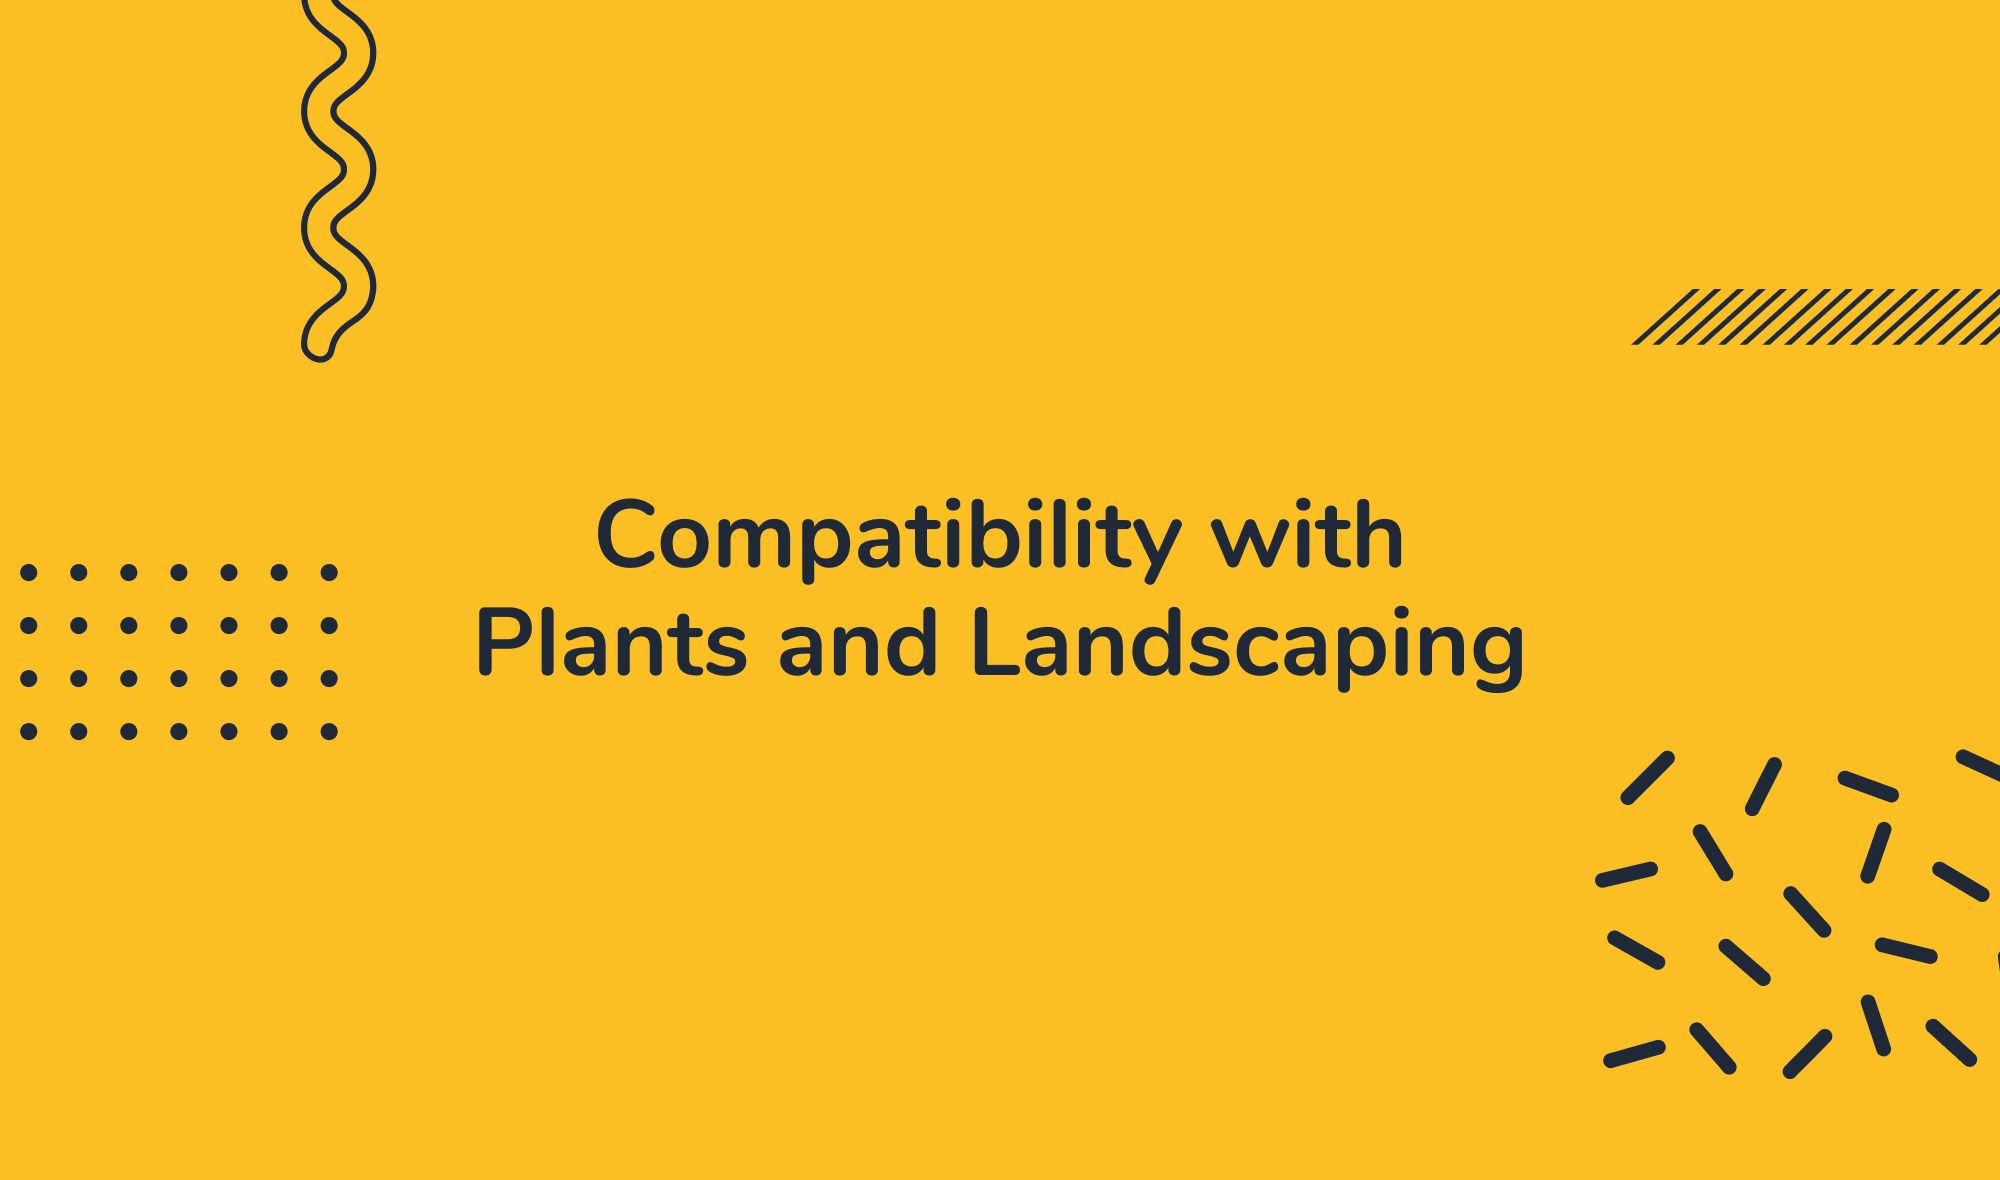 Compatibility with Plants and Landscaping